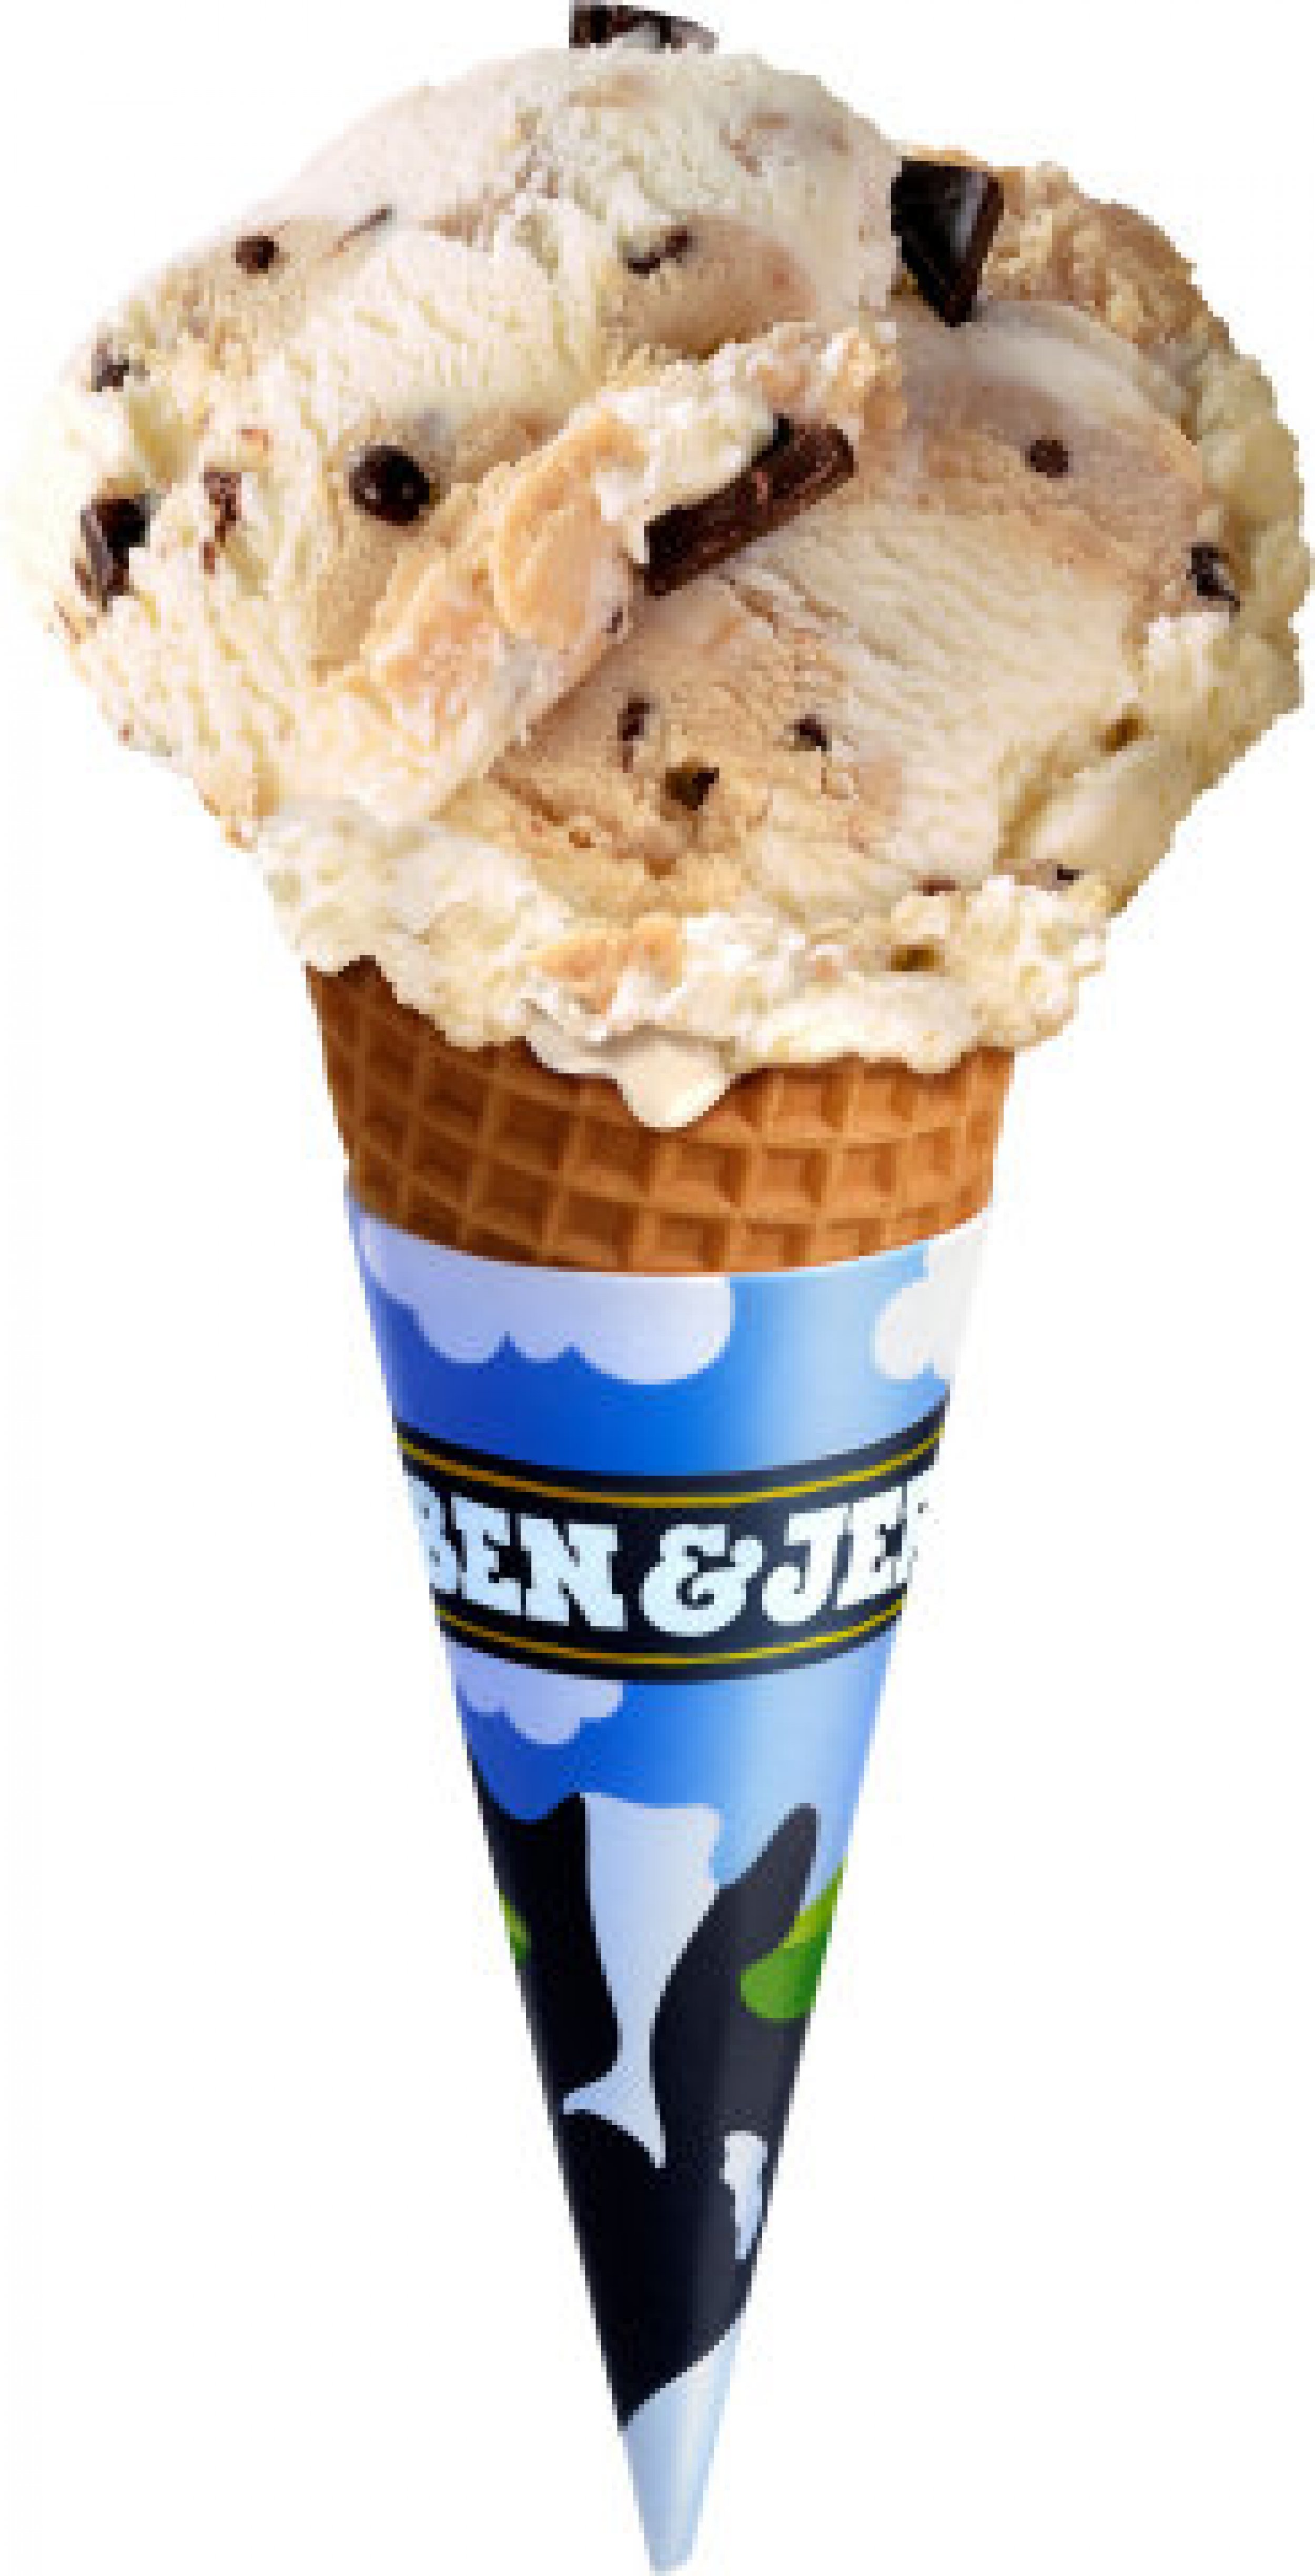 Ben & Jerry’s Free Cone Day Where To Get Your Free Ice Cream During 